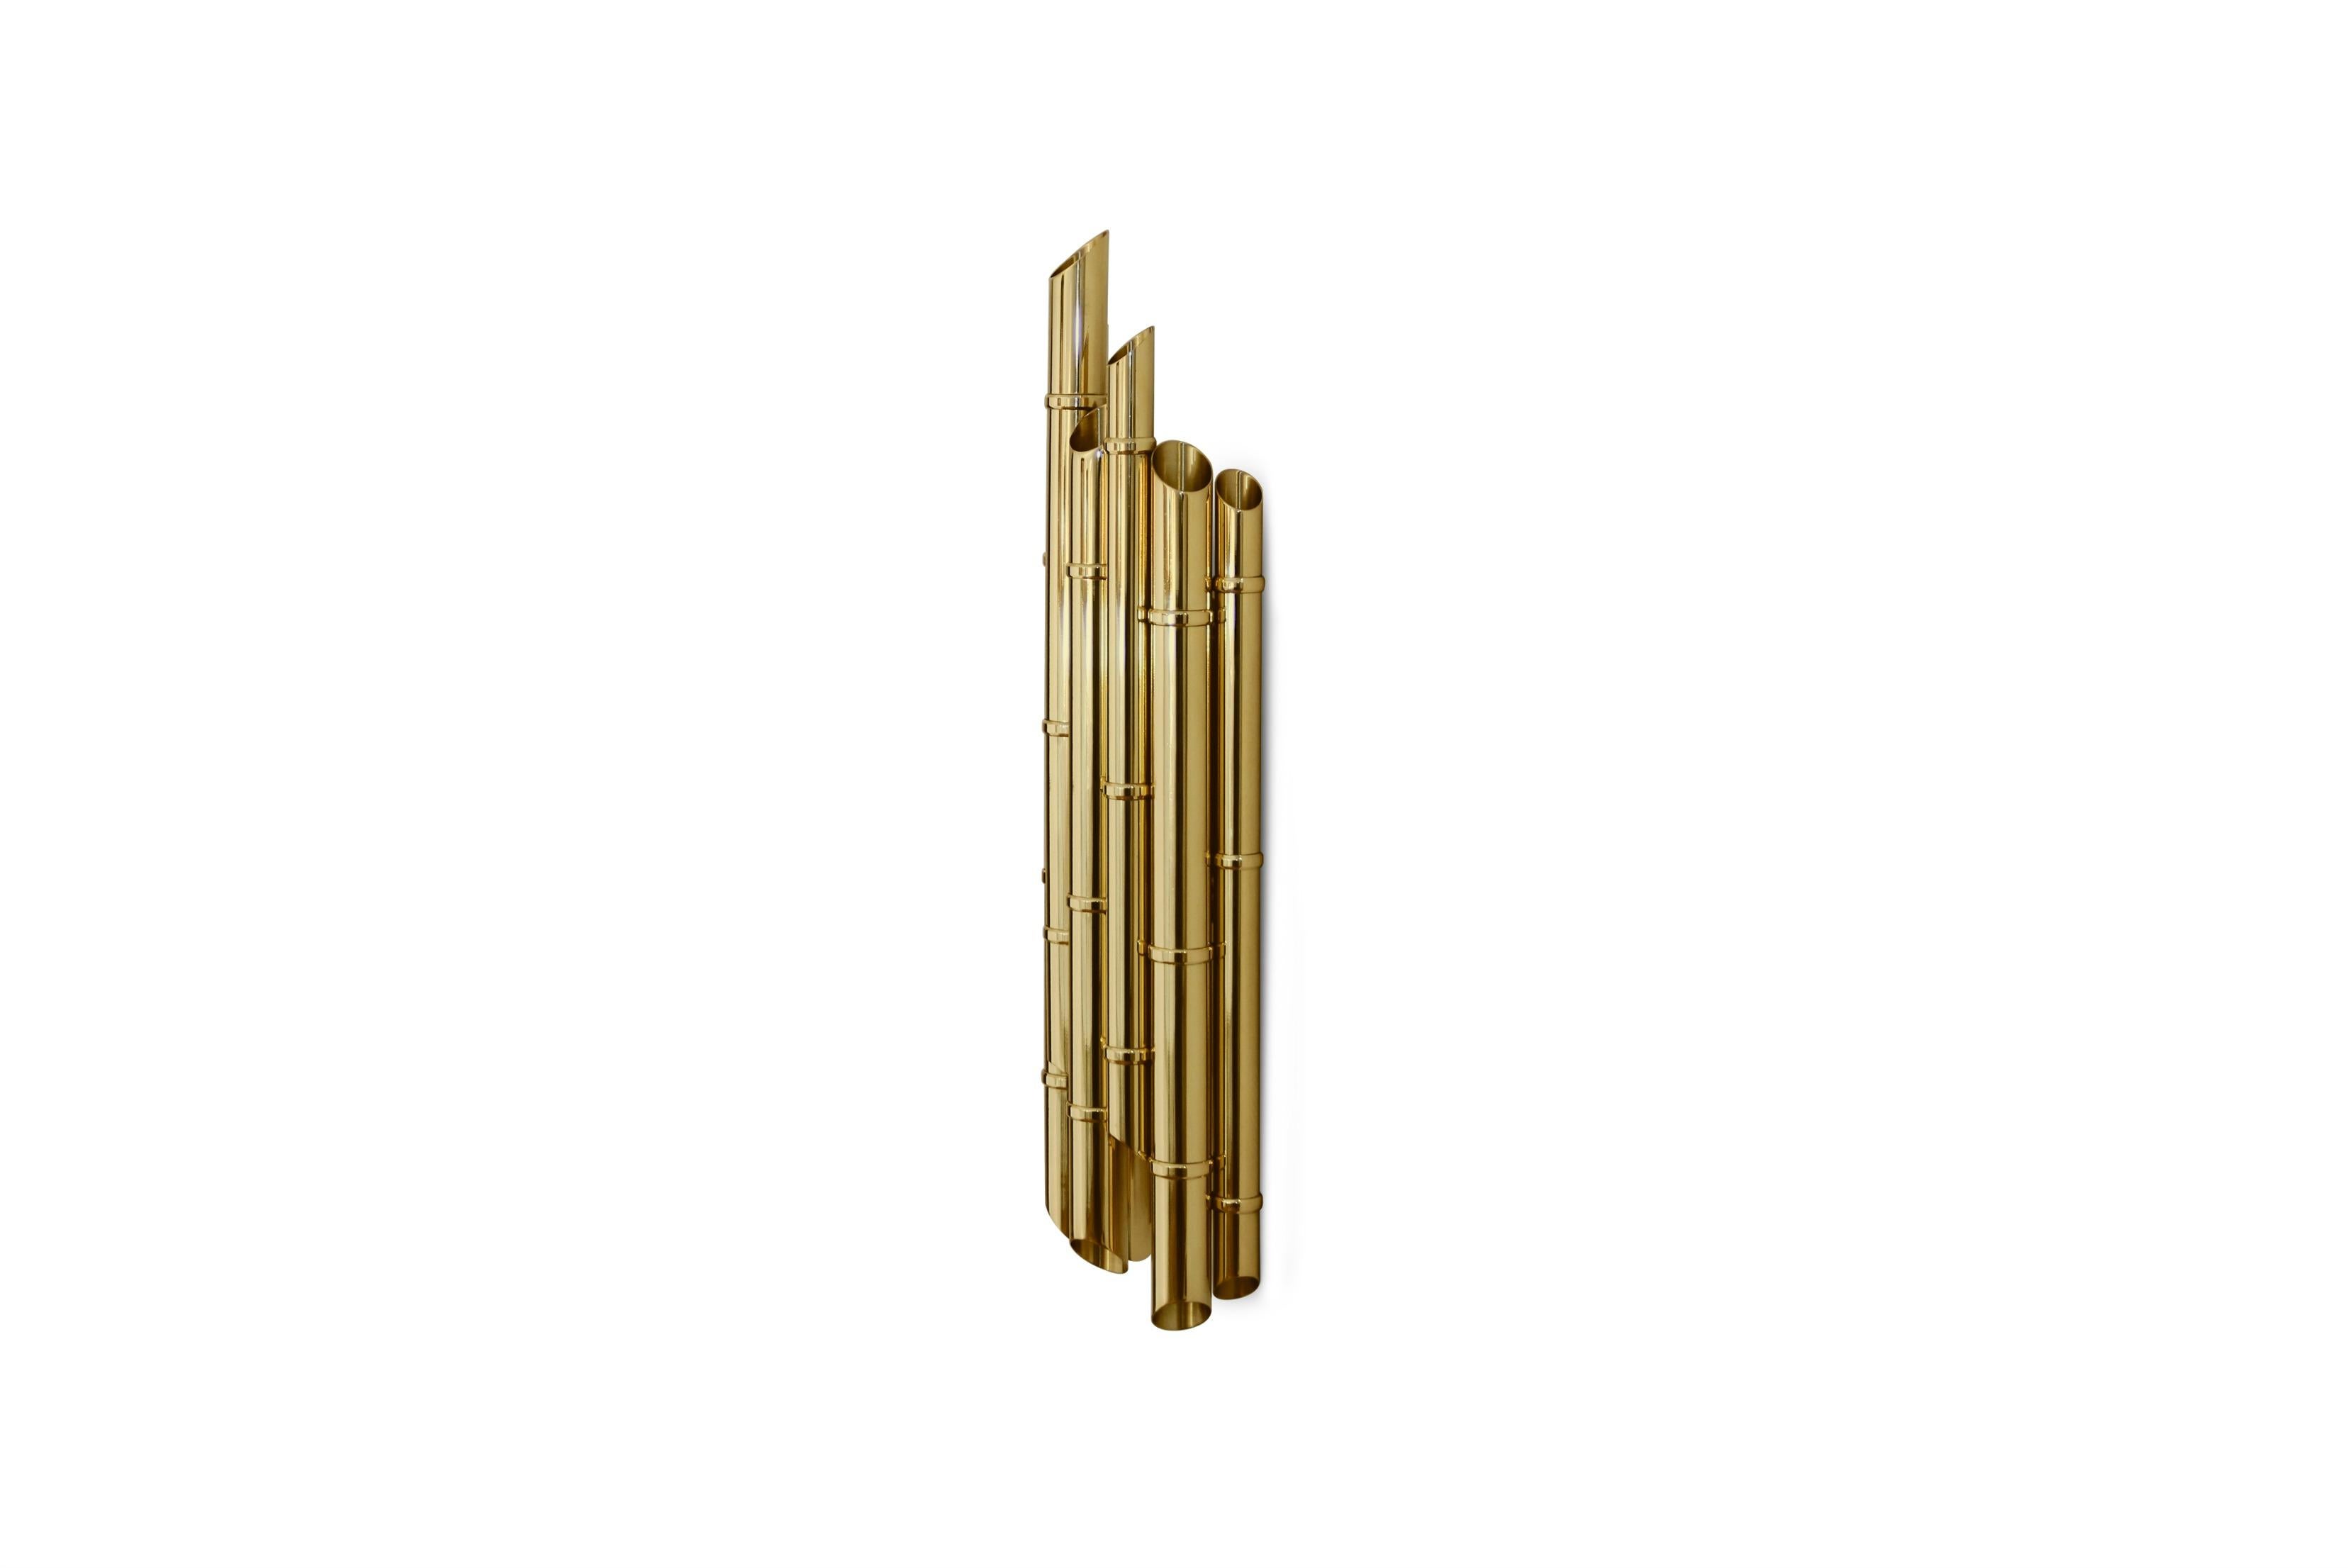 Located in Japan, Sakishima Islands are part of Ryukyu Islands chain. Saki wall Light is a tribute to this unforgettable island group. This gold plated brass sconce is a remarkable lighting piece that will create a warm and cozy modern interior